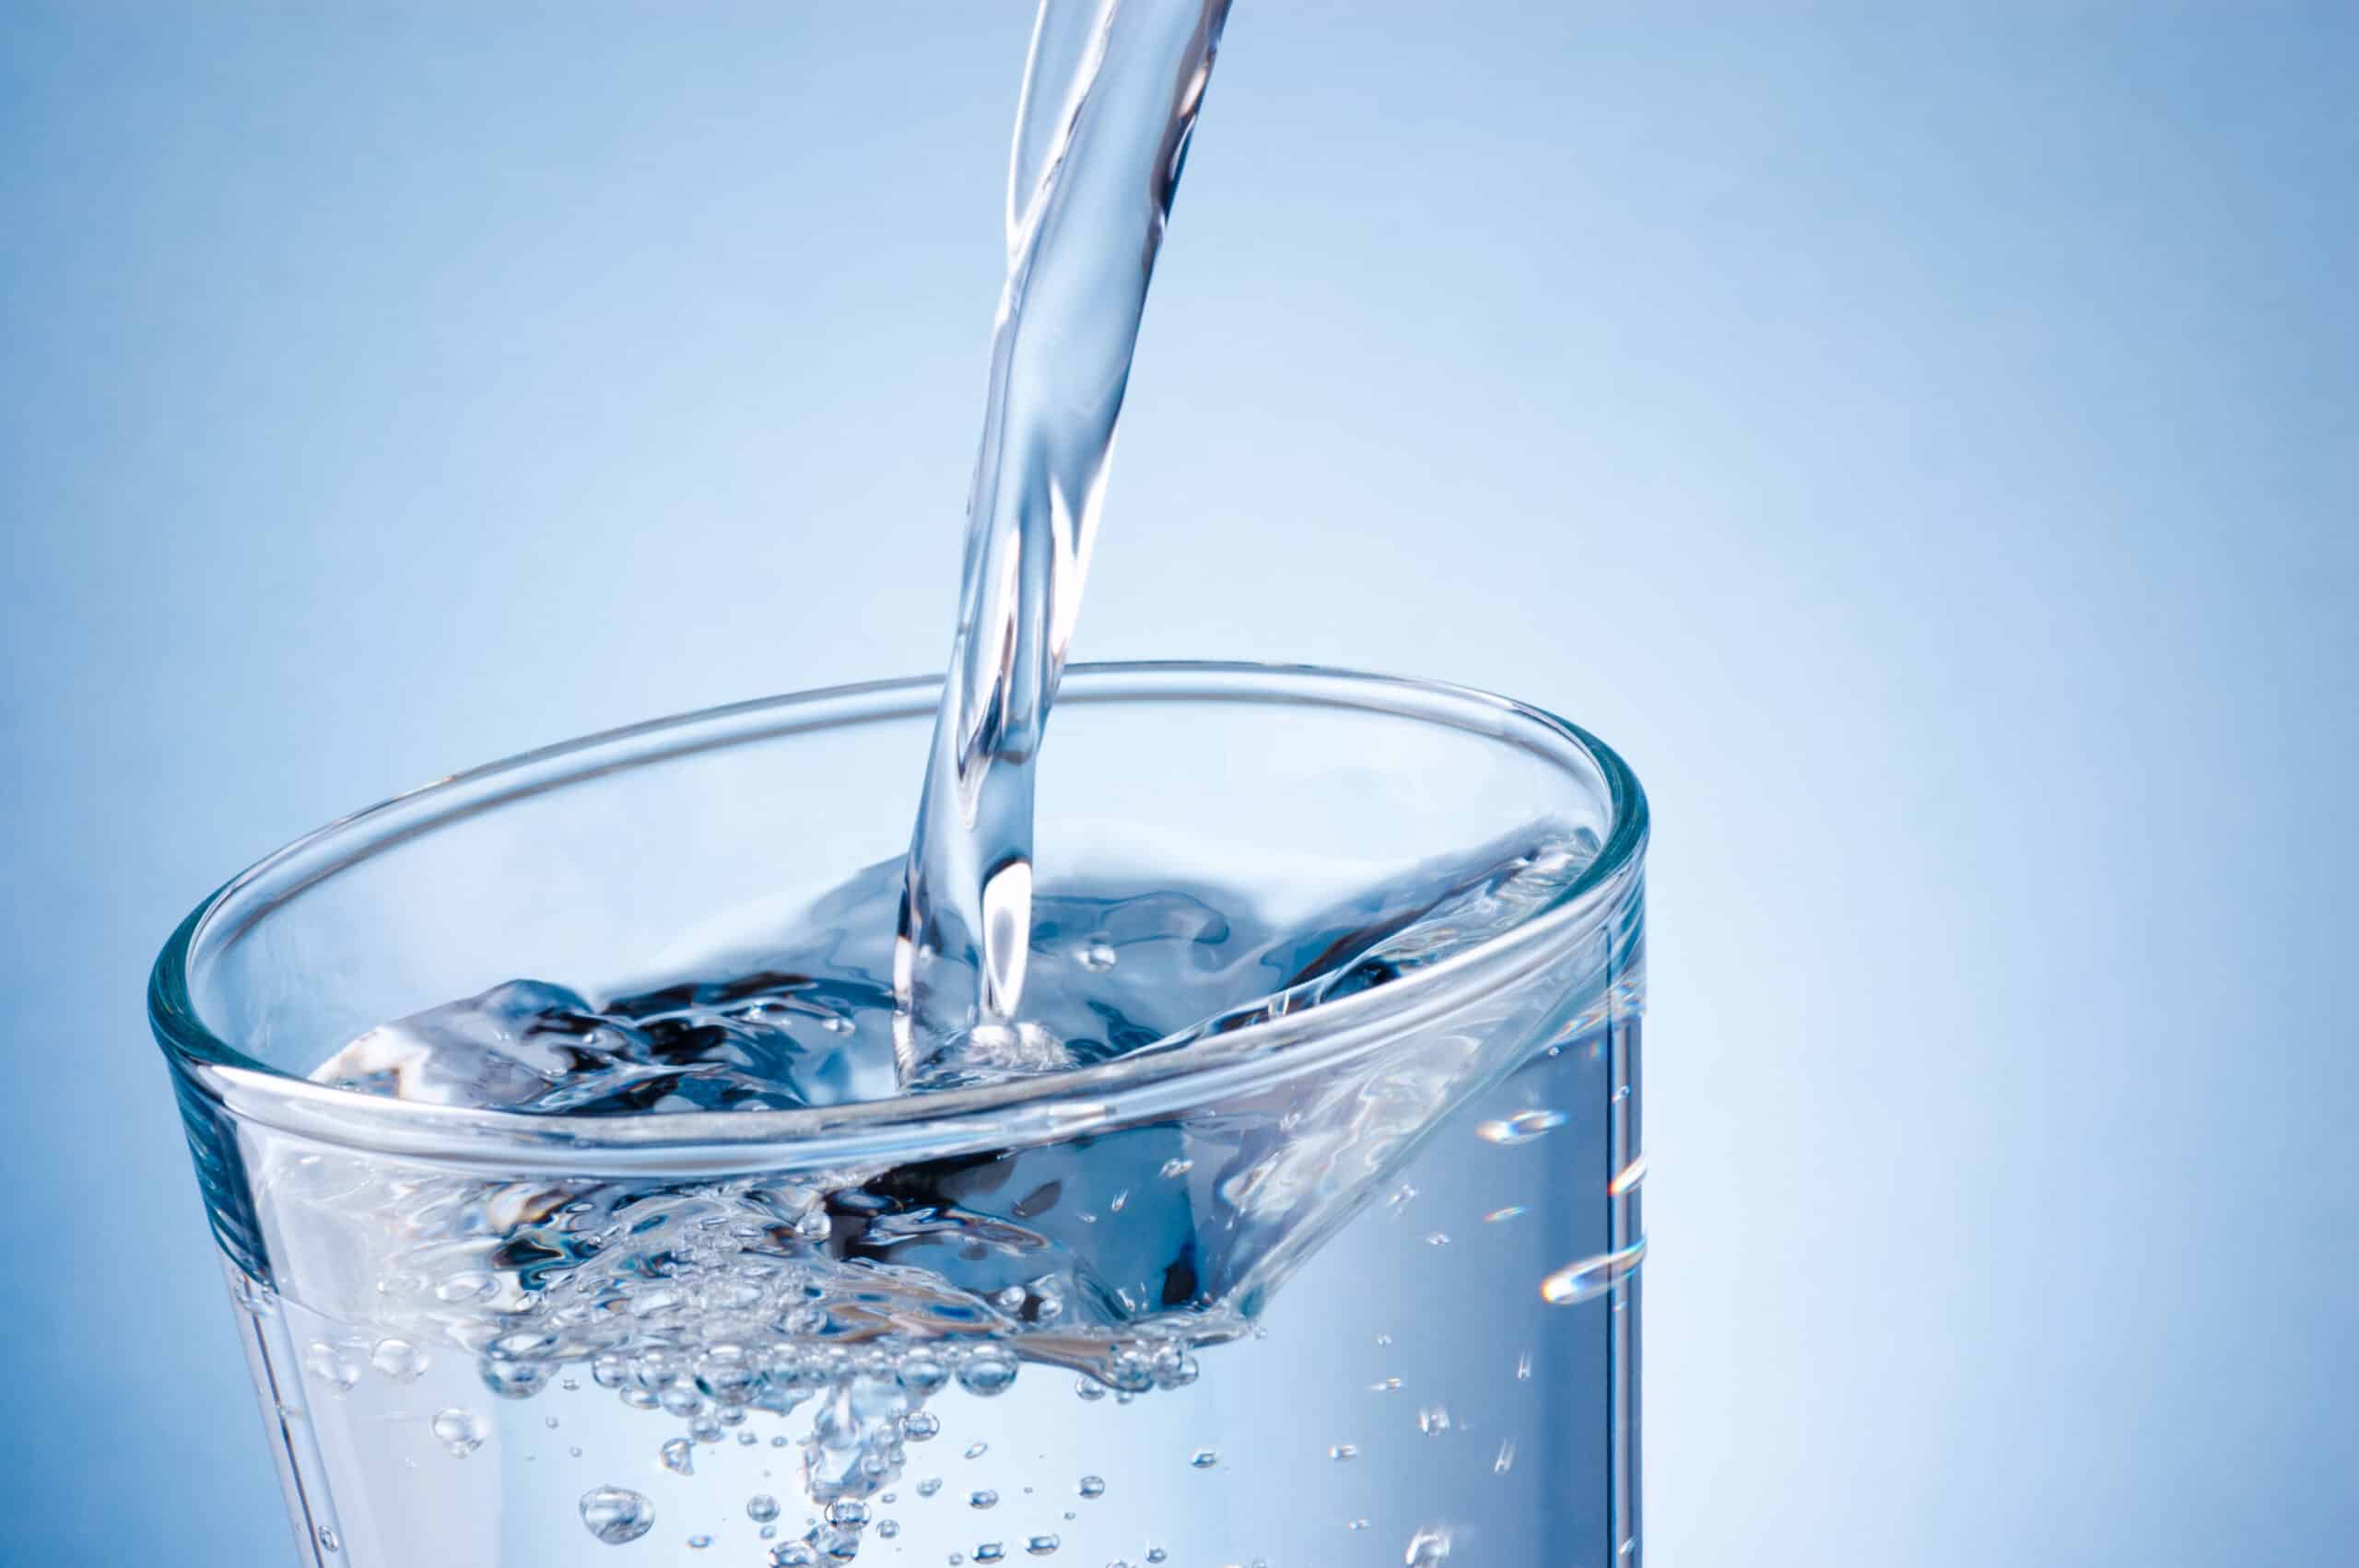 When It Comes To Drinking Water, What Does “Sustainability” Really Mean?